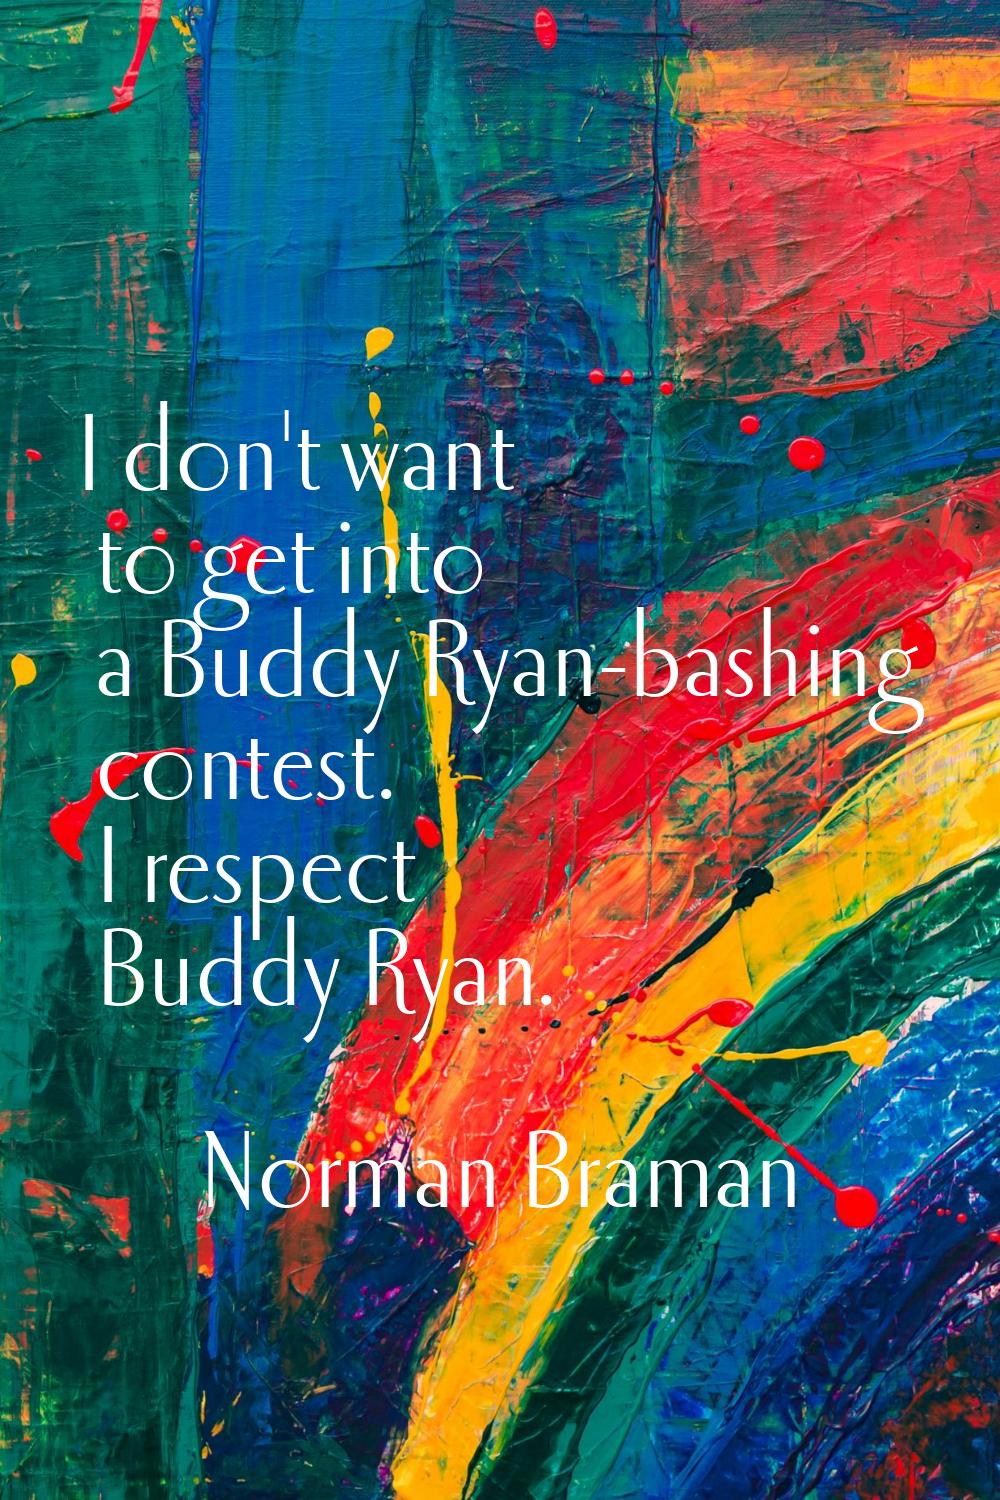 I don't want to get into a Buddy Ryan-bashing contest. I respect Buddy Ryan.